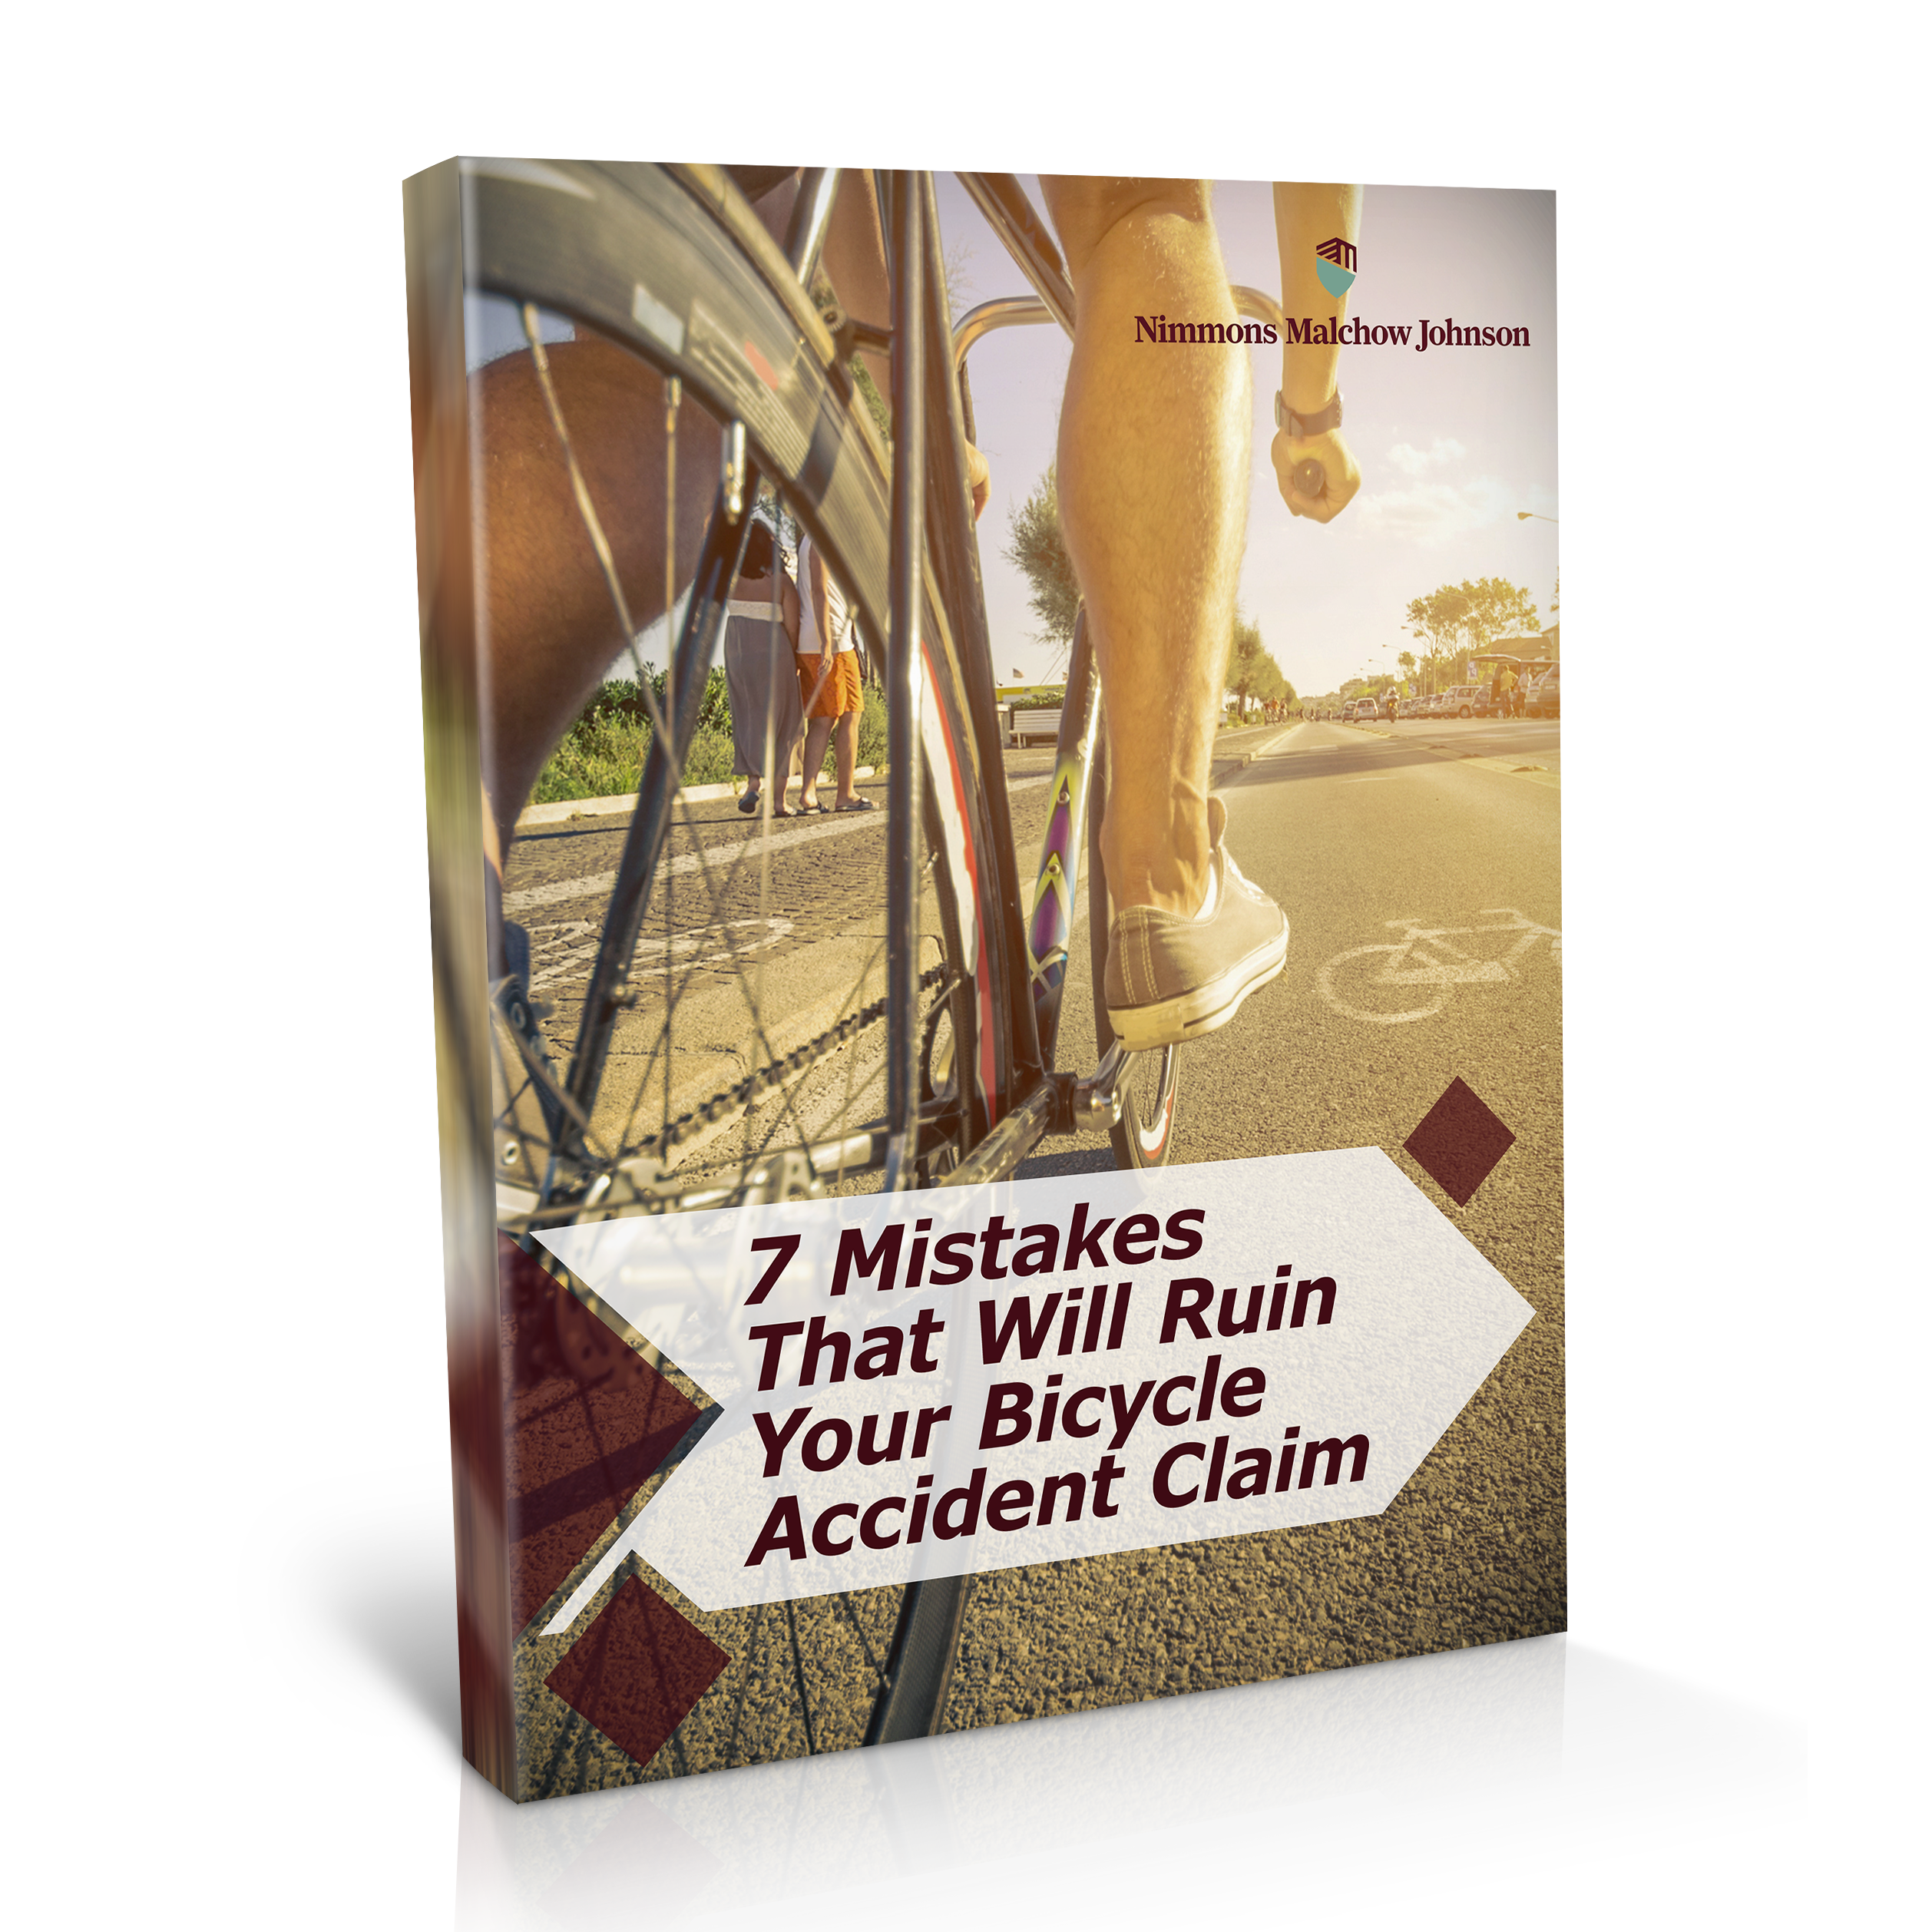 7 Mistakes That Will Ruin Your Bicycle Accident Claim